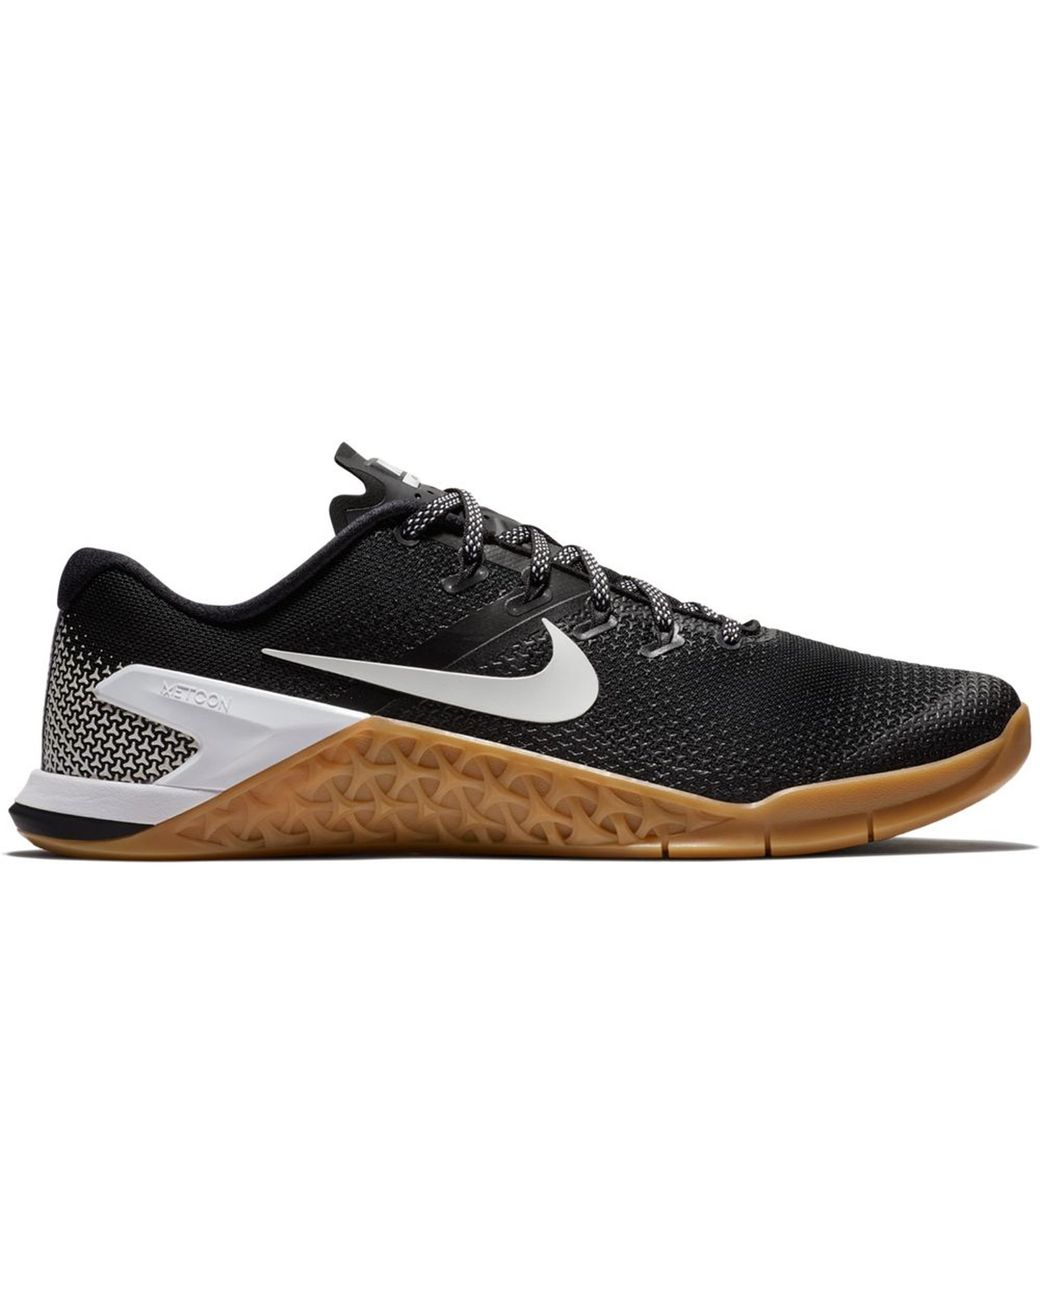 nike metcon 4 black and gum